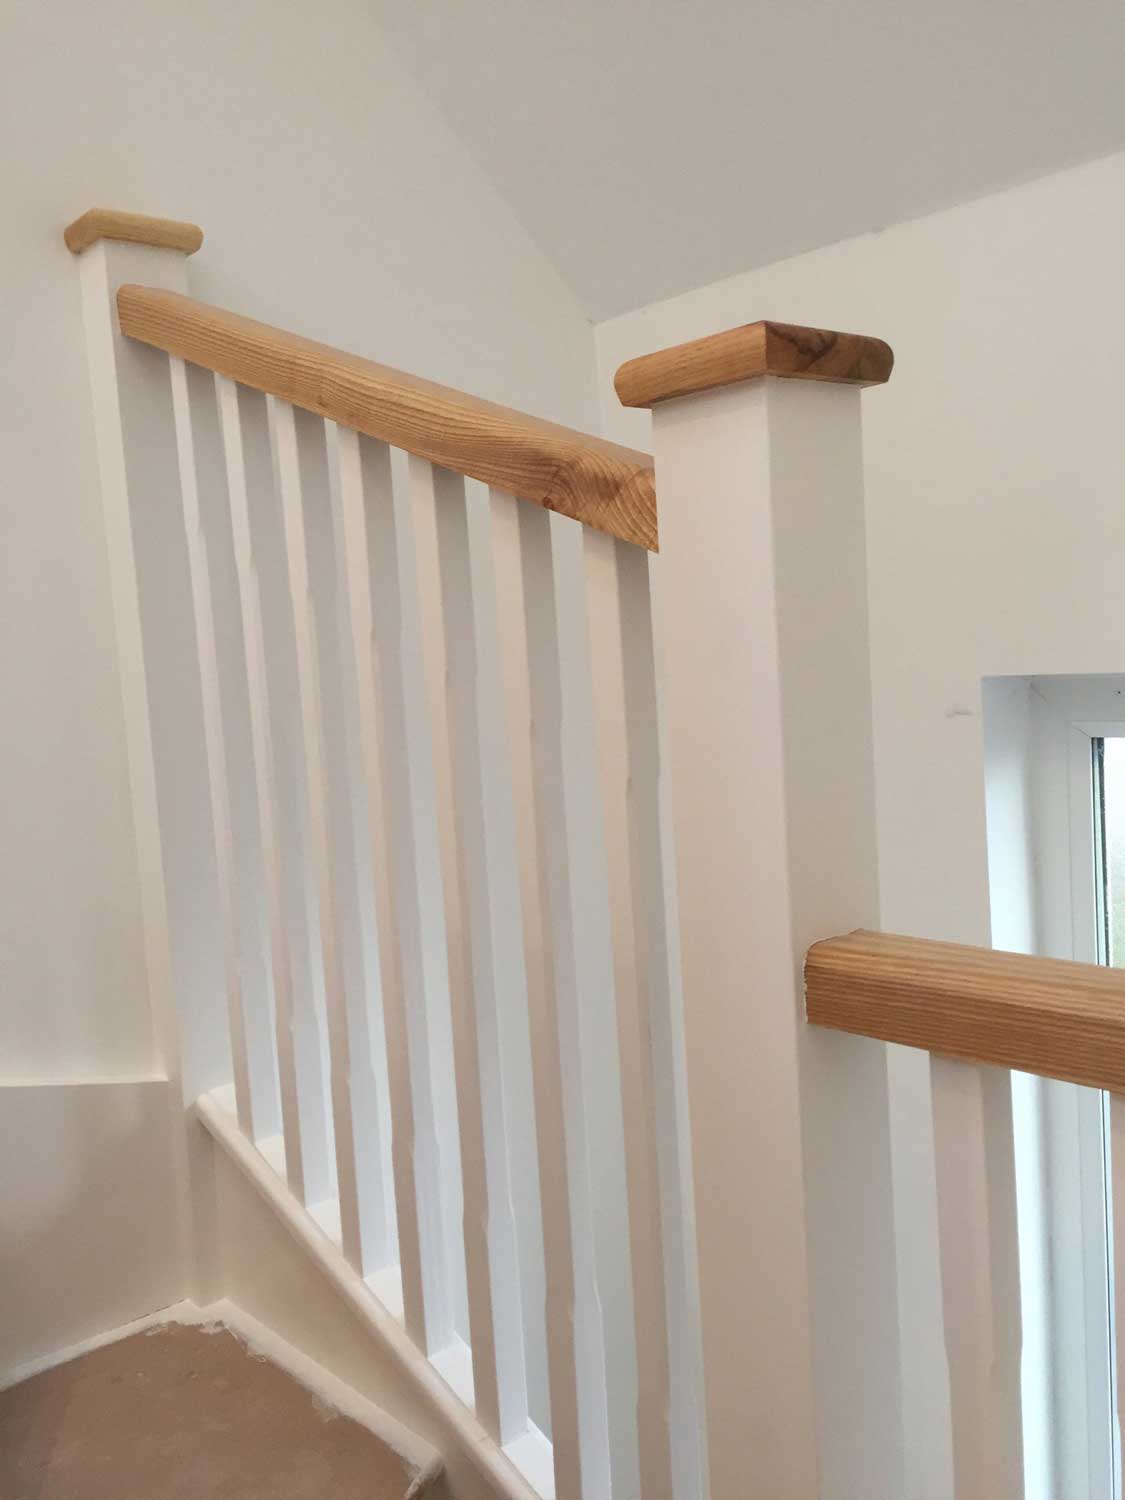 Timber Spindles